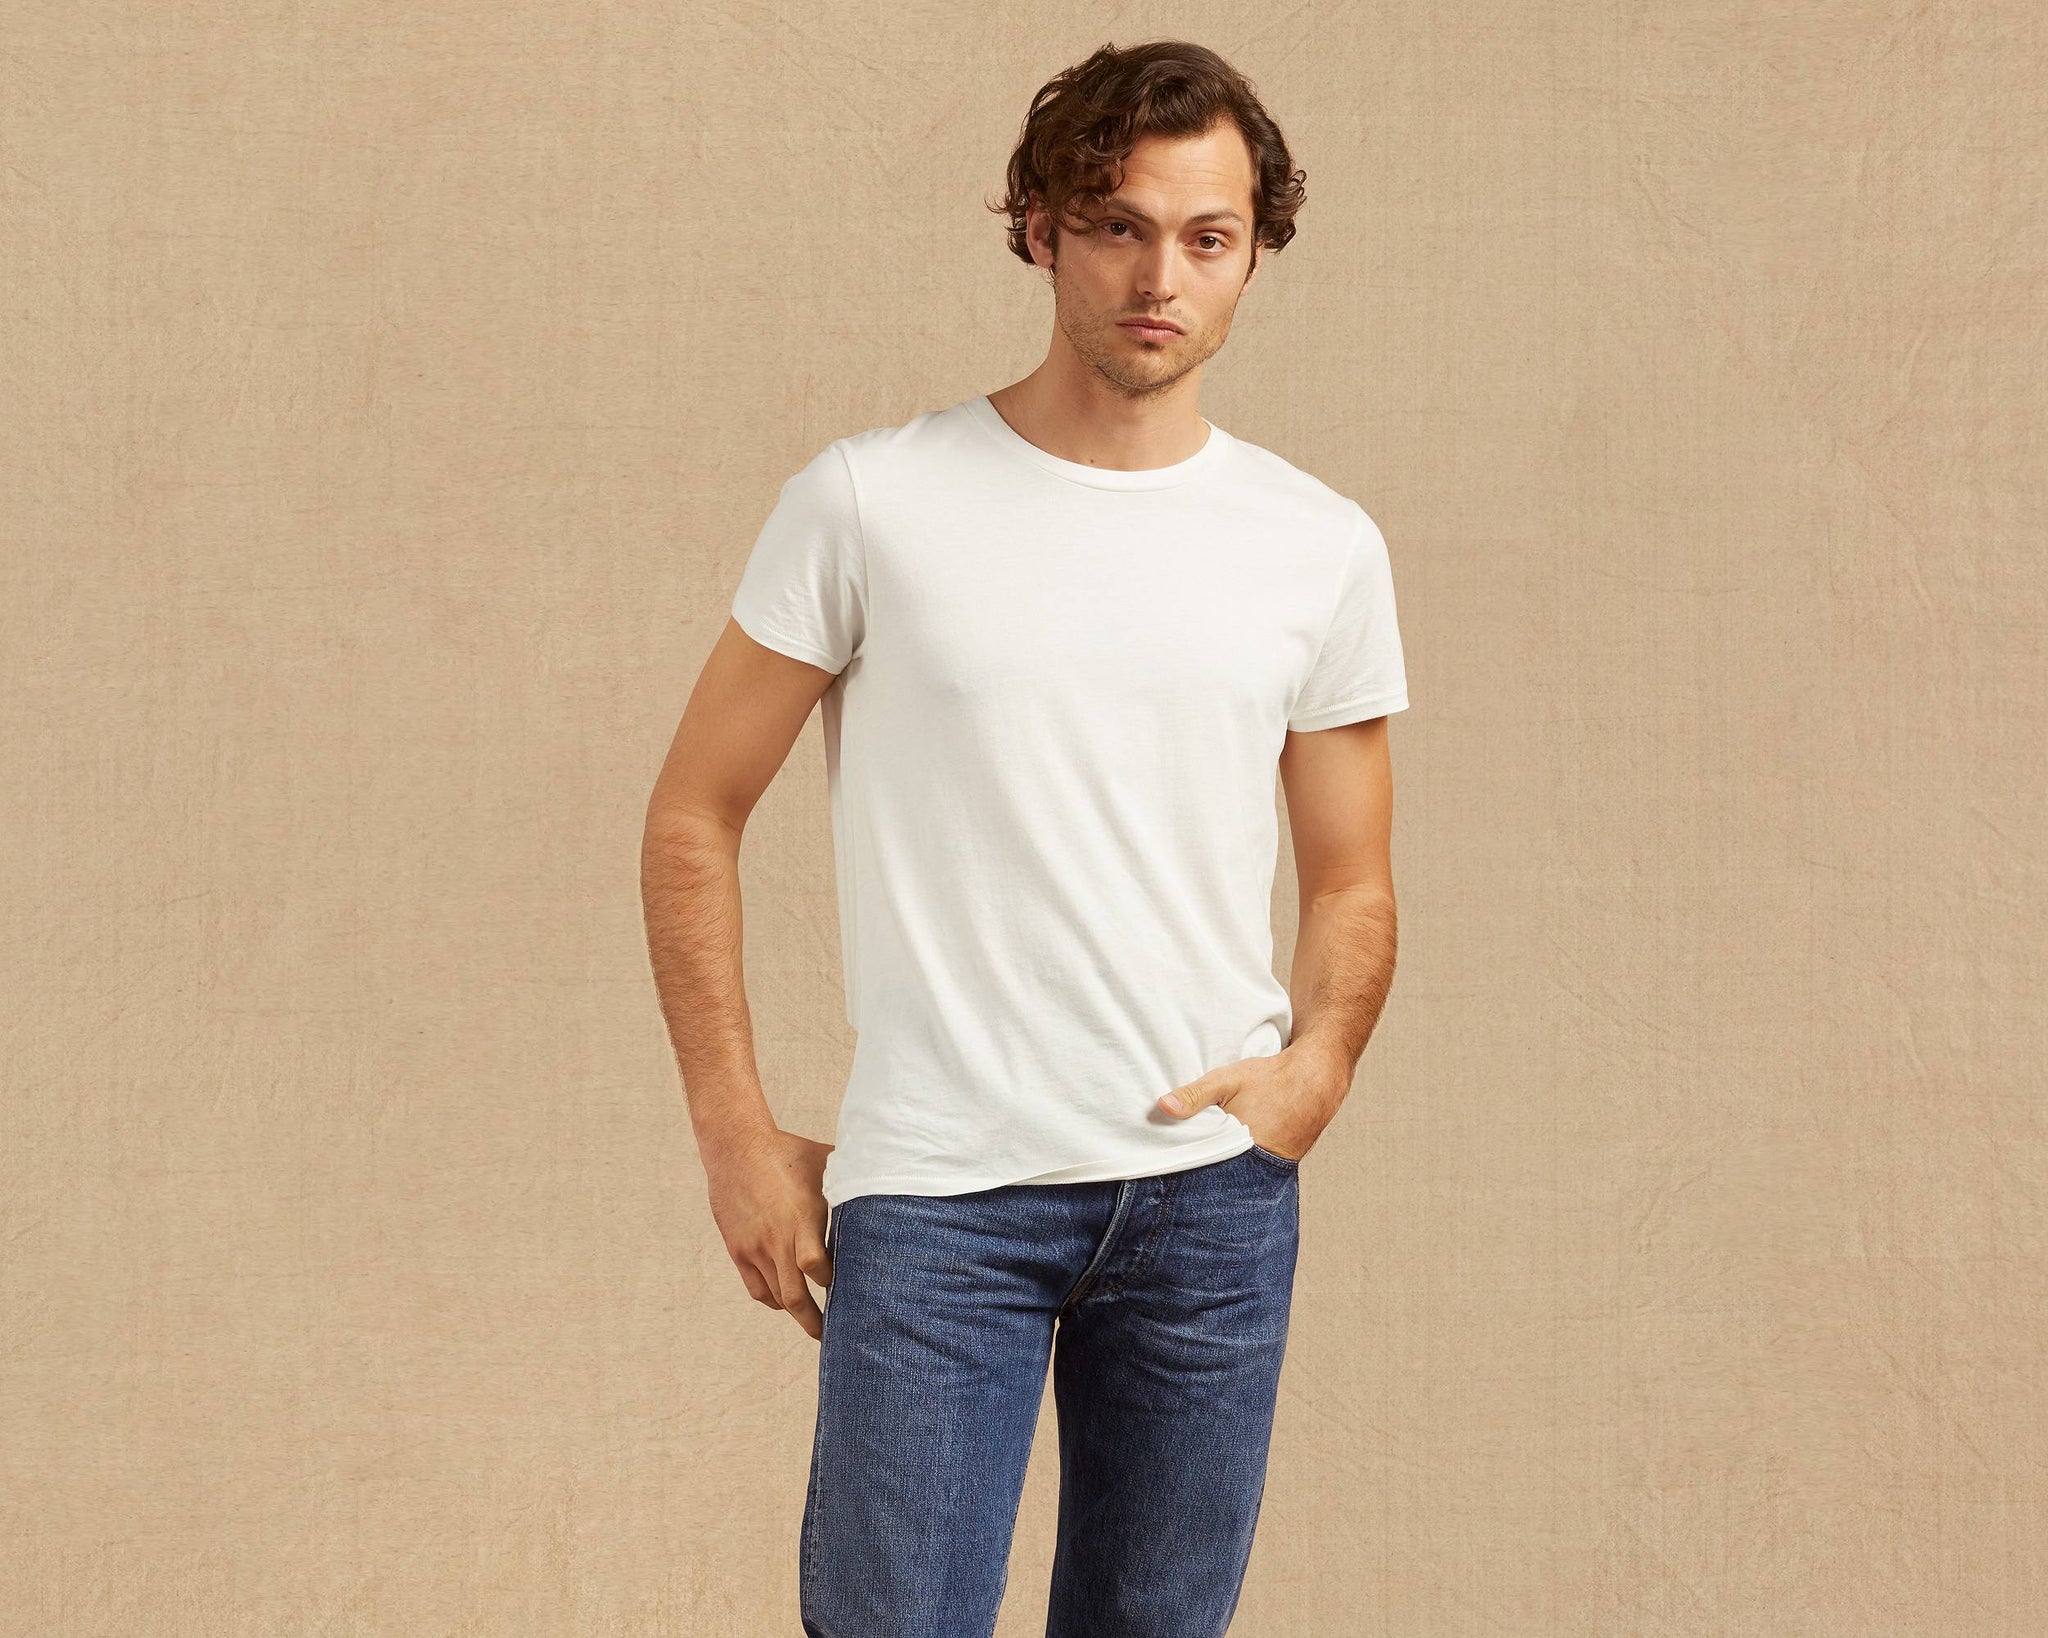 Levis Vintage Clothing 50's Sportswear T - White - Elroy Clothing